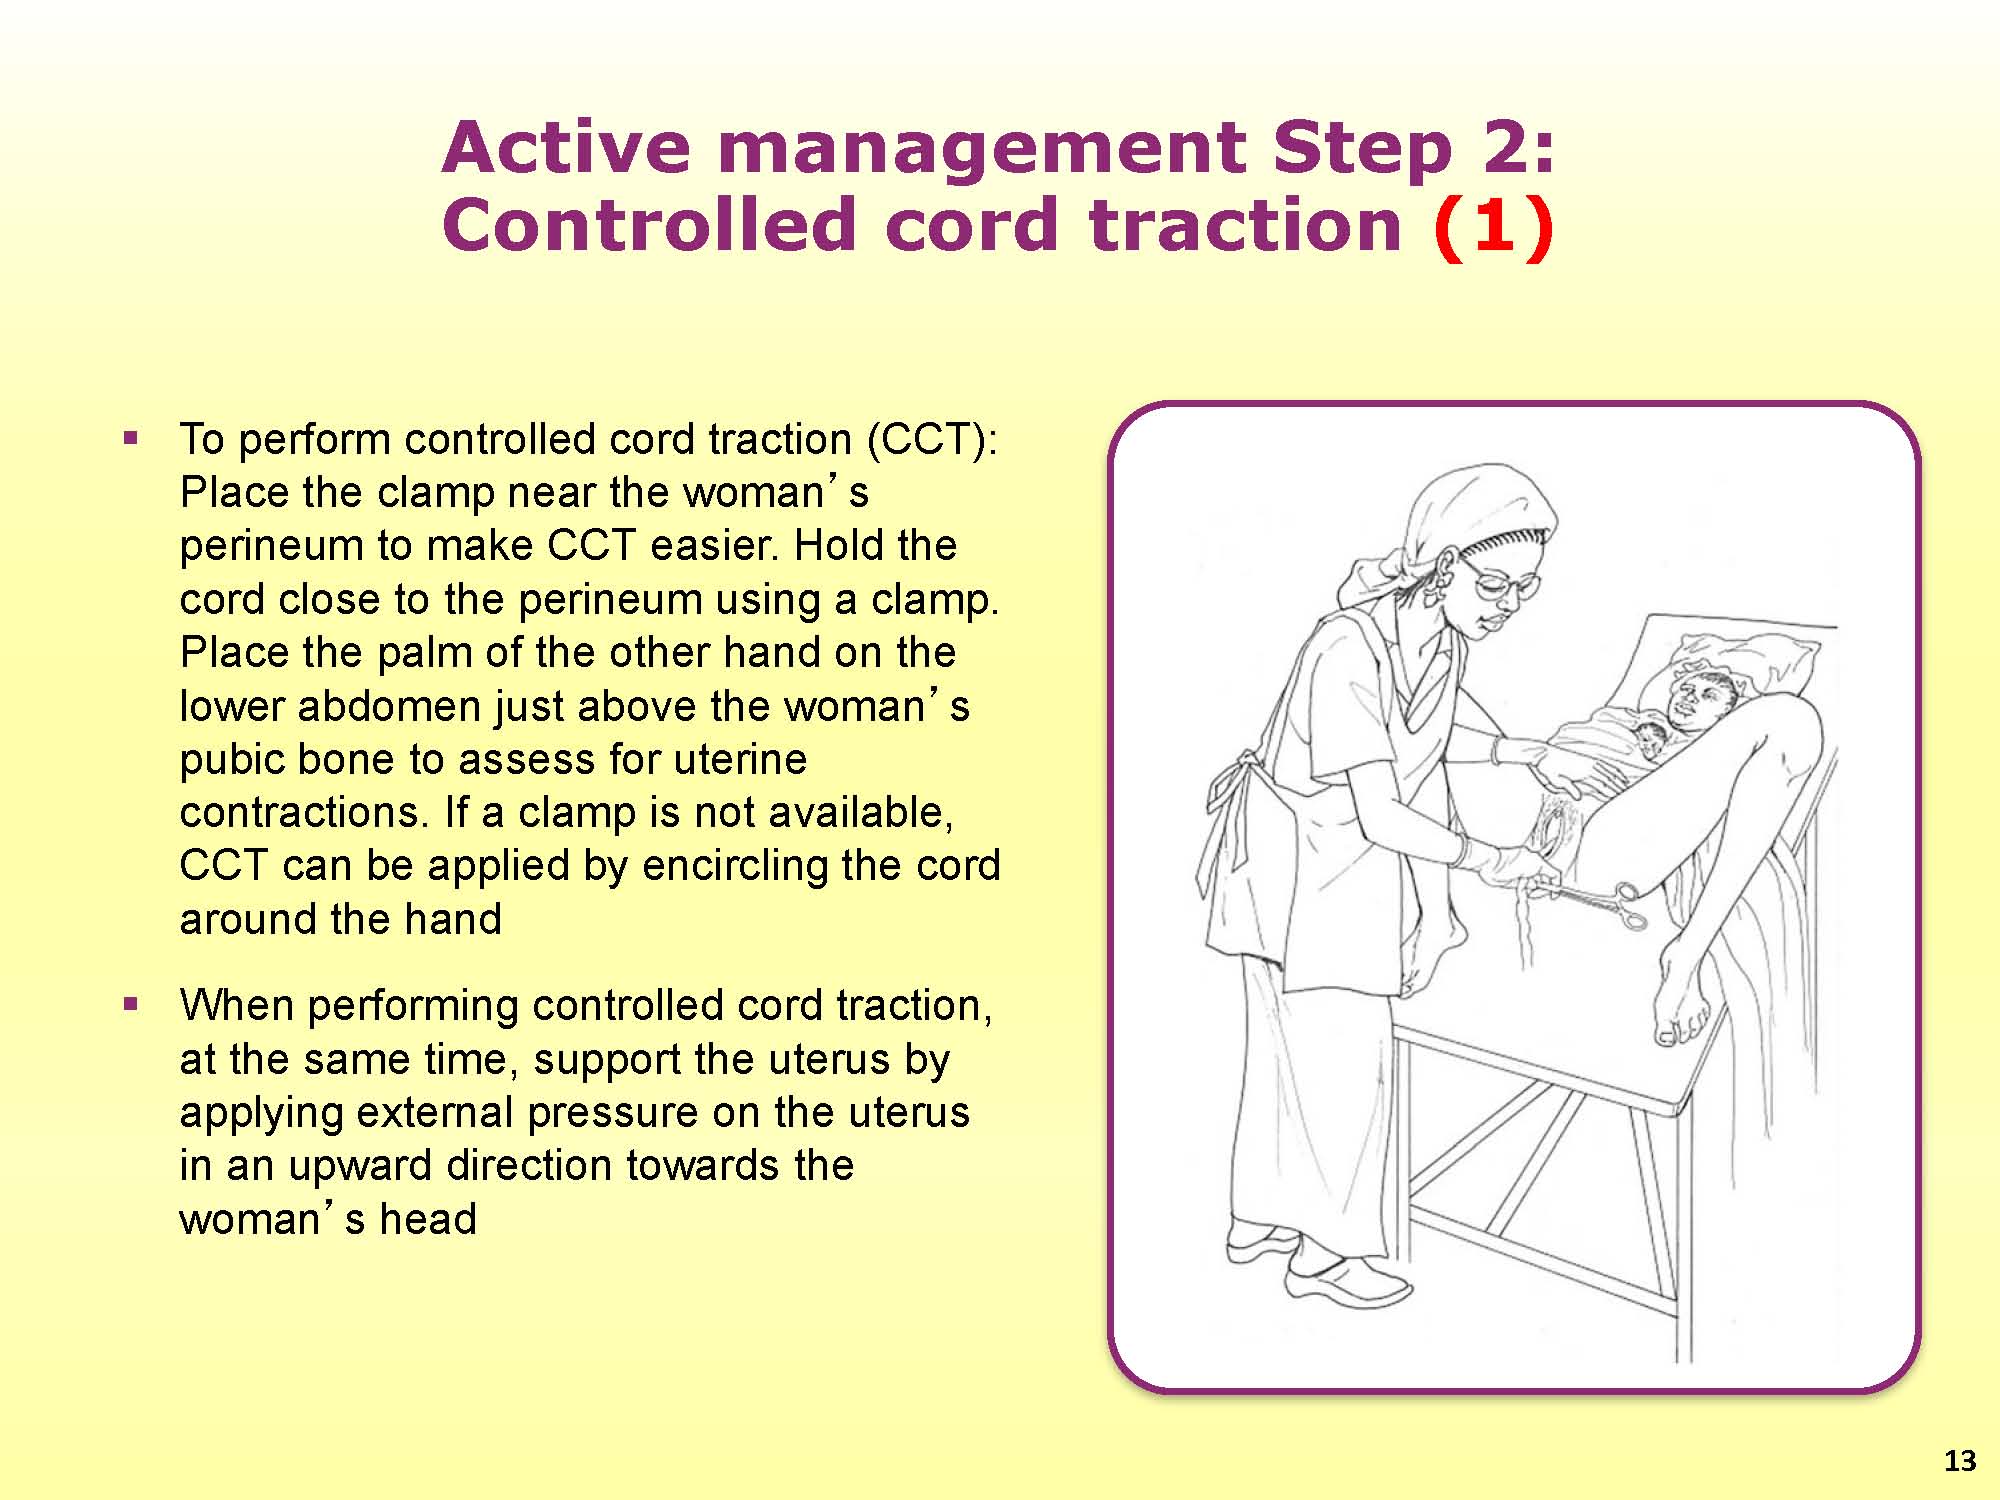 Normal Vaginal Delivery – Stage 3, Tutorial